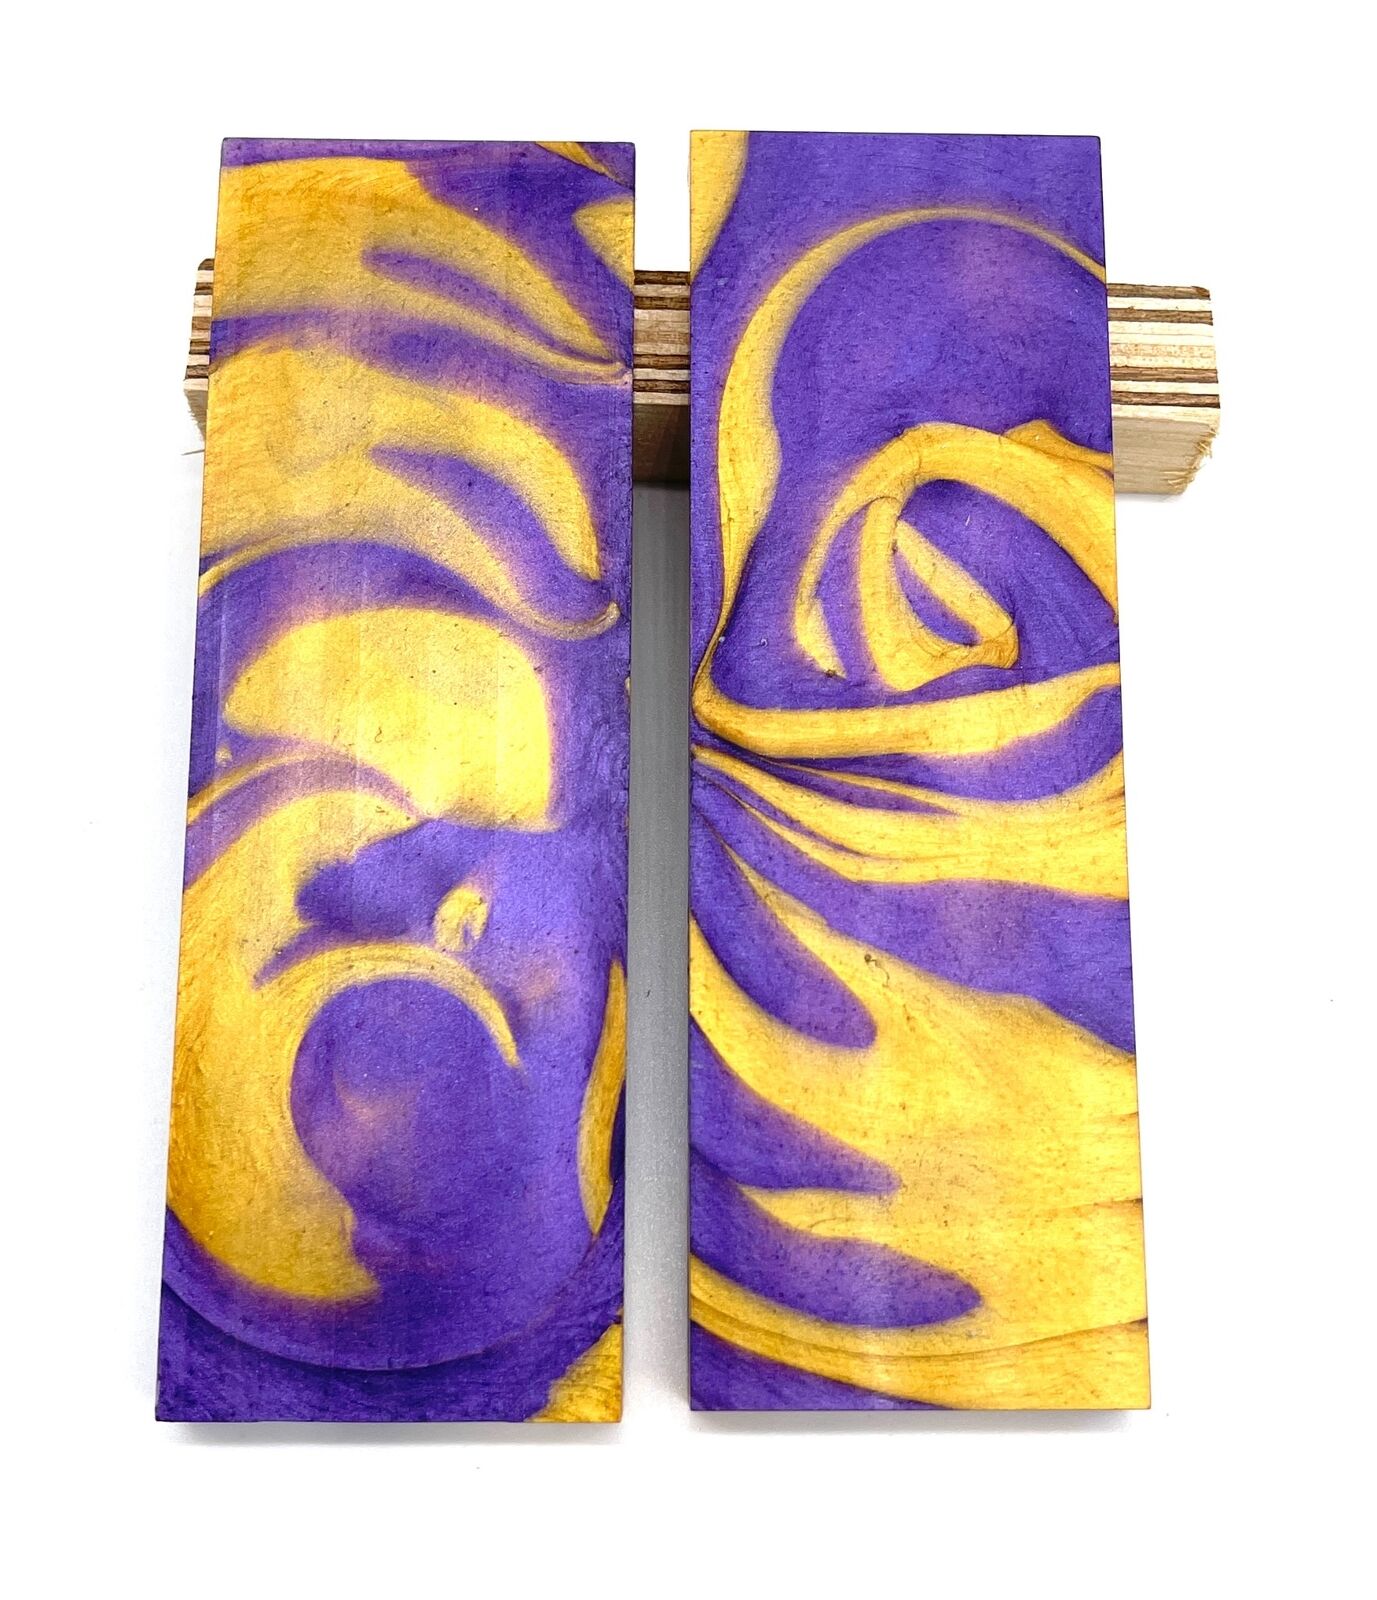 LSU PURPLE & GOLD CUSTOM COMPOSITE KNIFE HANDLE MATERIAL BLANK SCALES